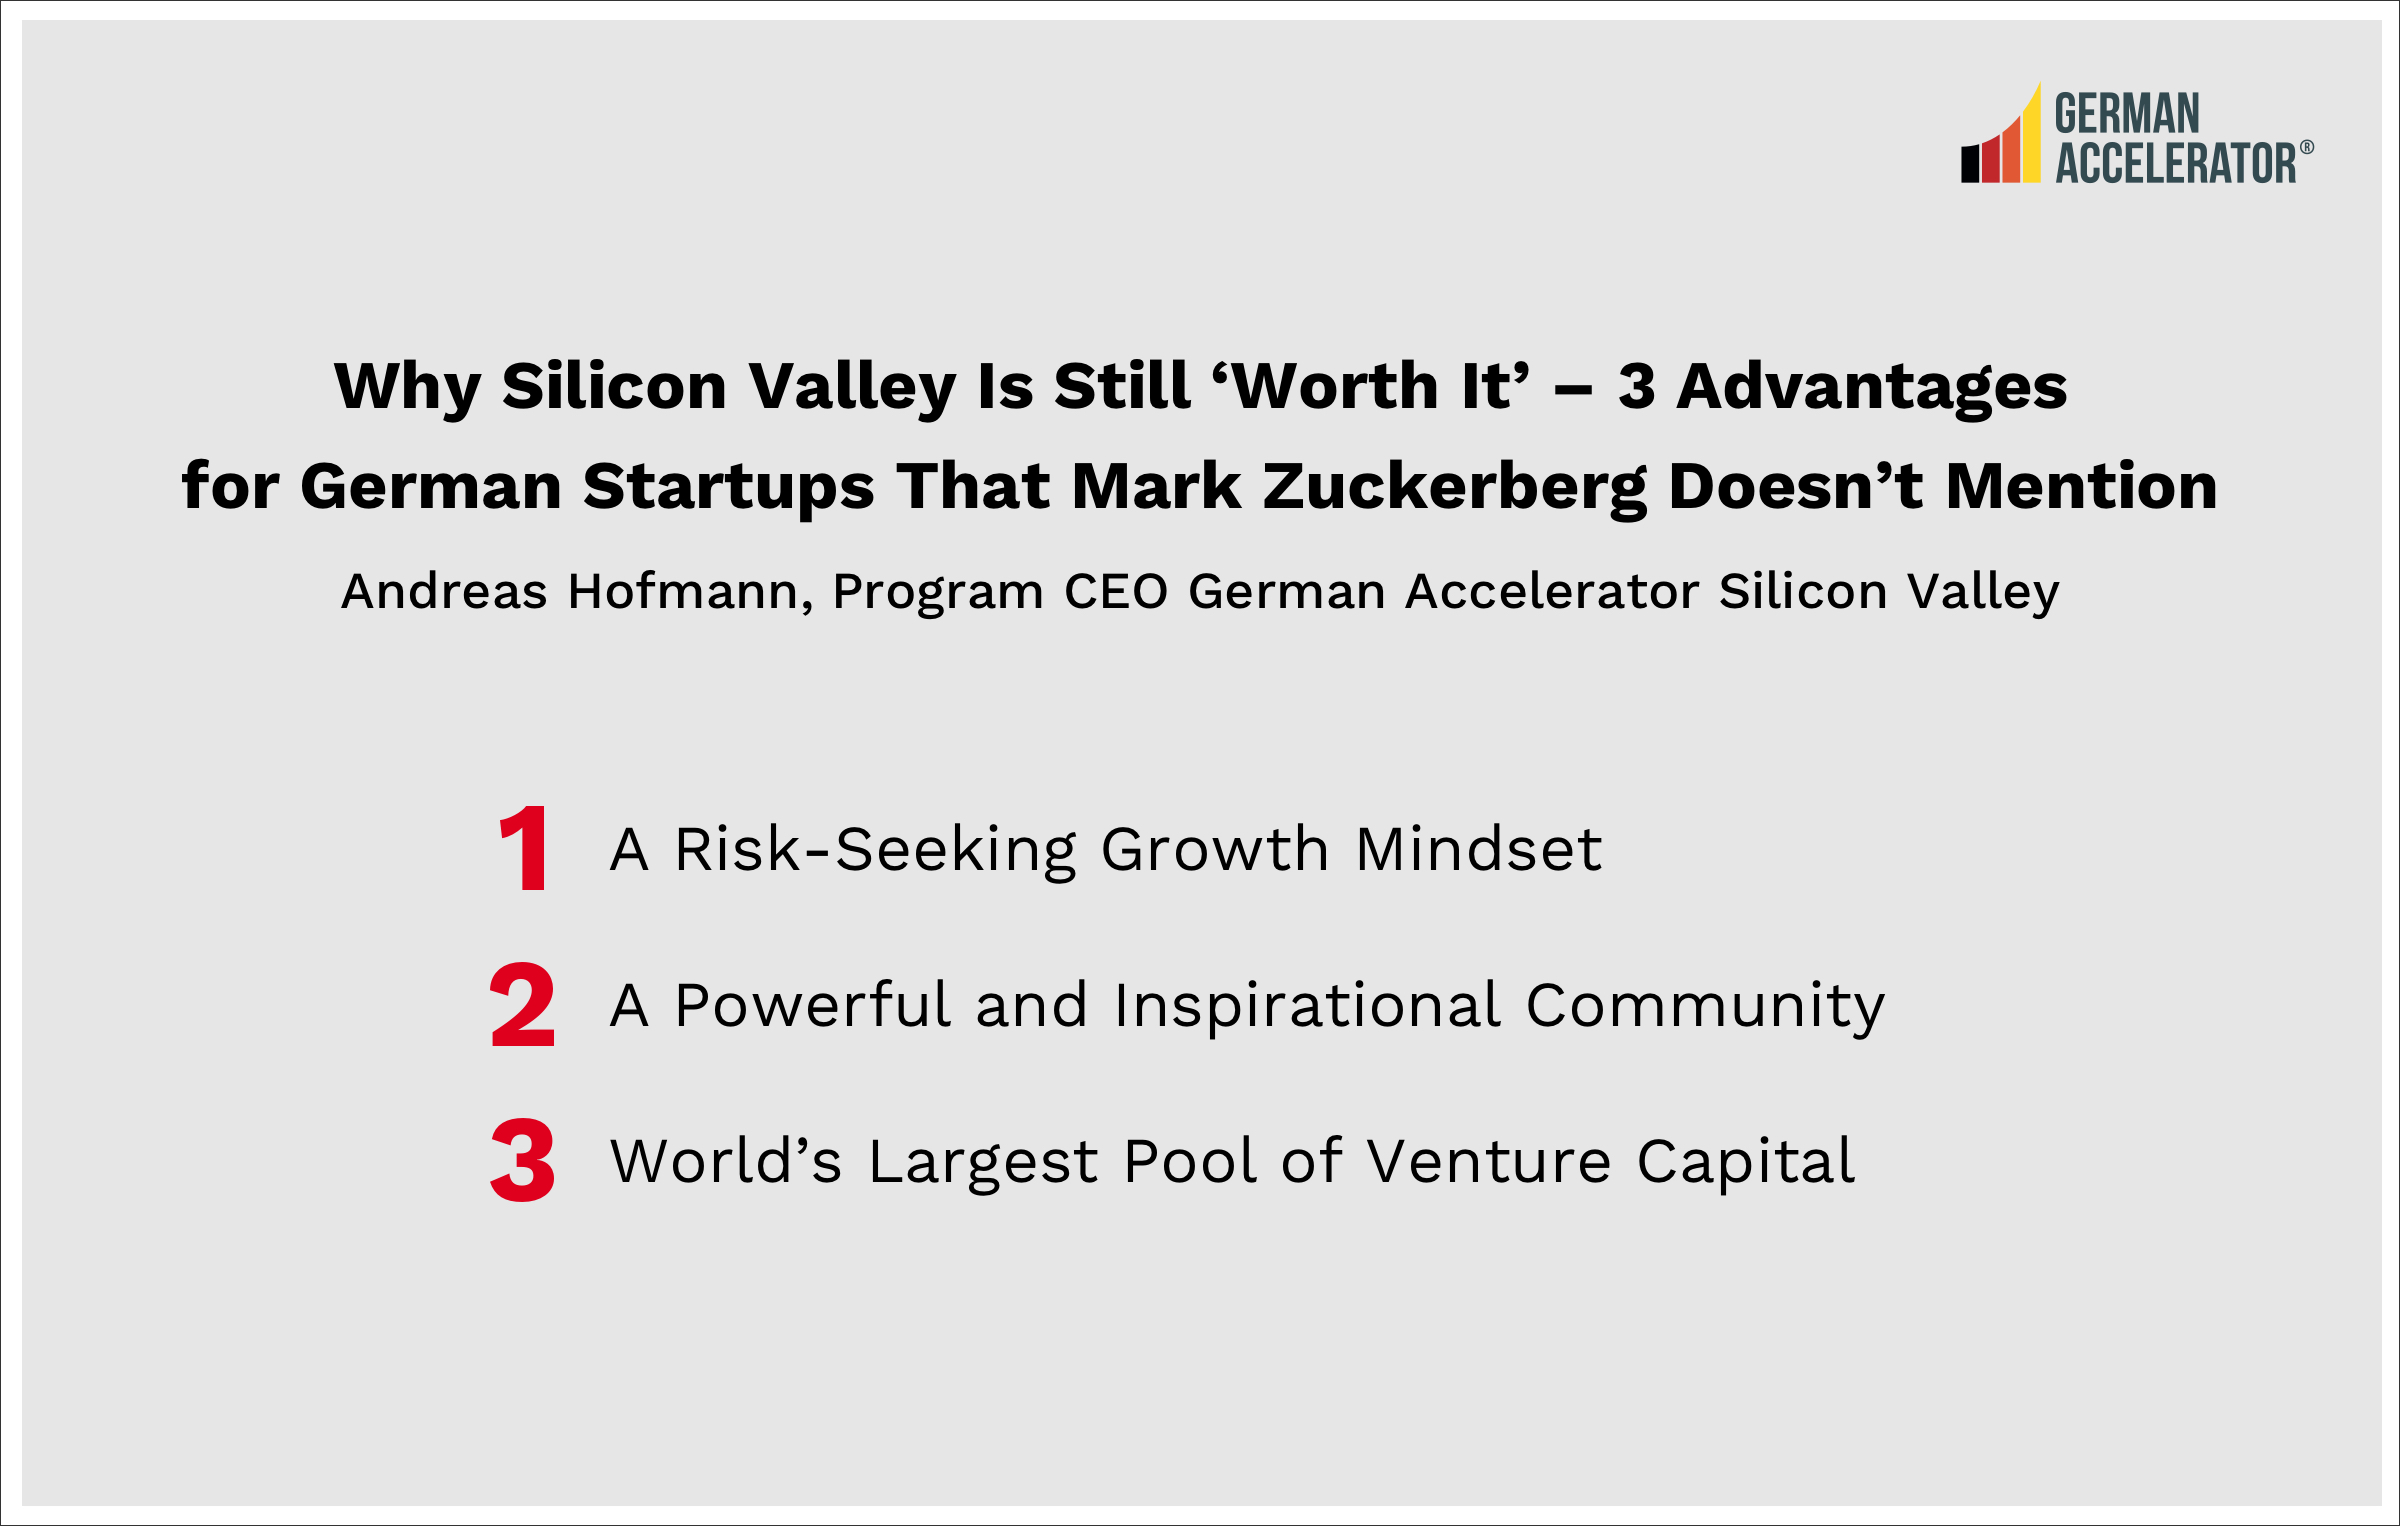 Why Silicon Valley Is Still ‘Worth It’ – 3 Advantages for German Startups That Mark Zuckerberg Doesn’t Mention